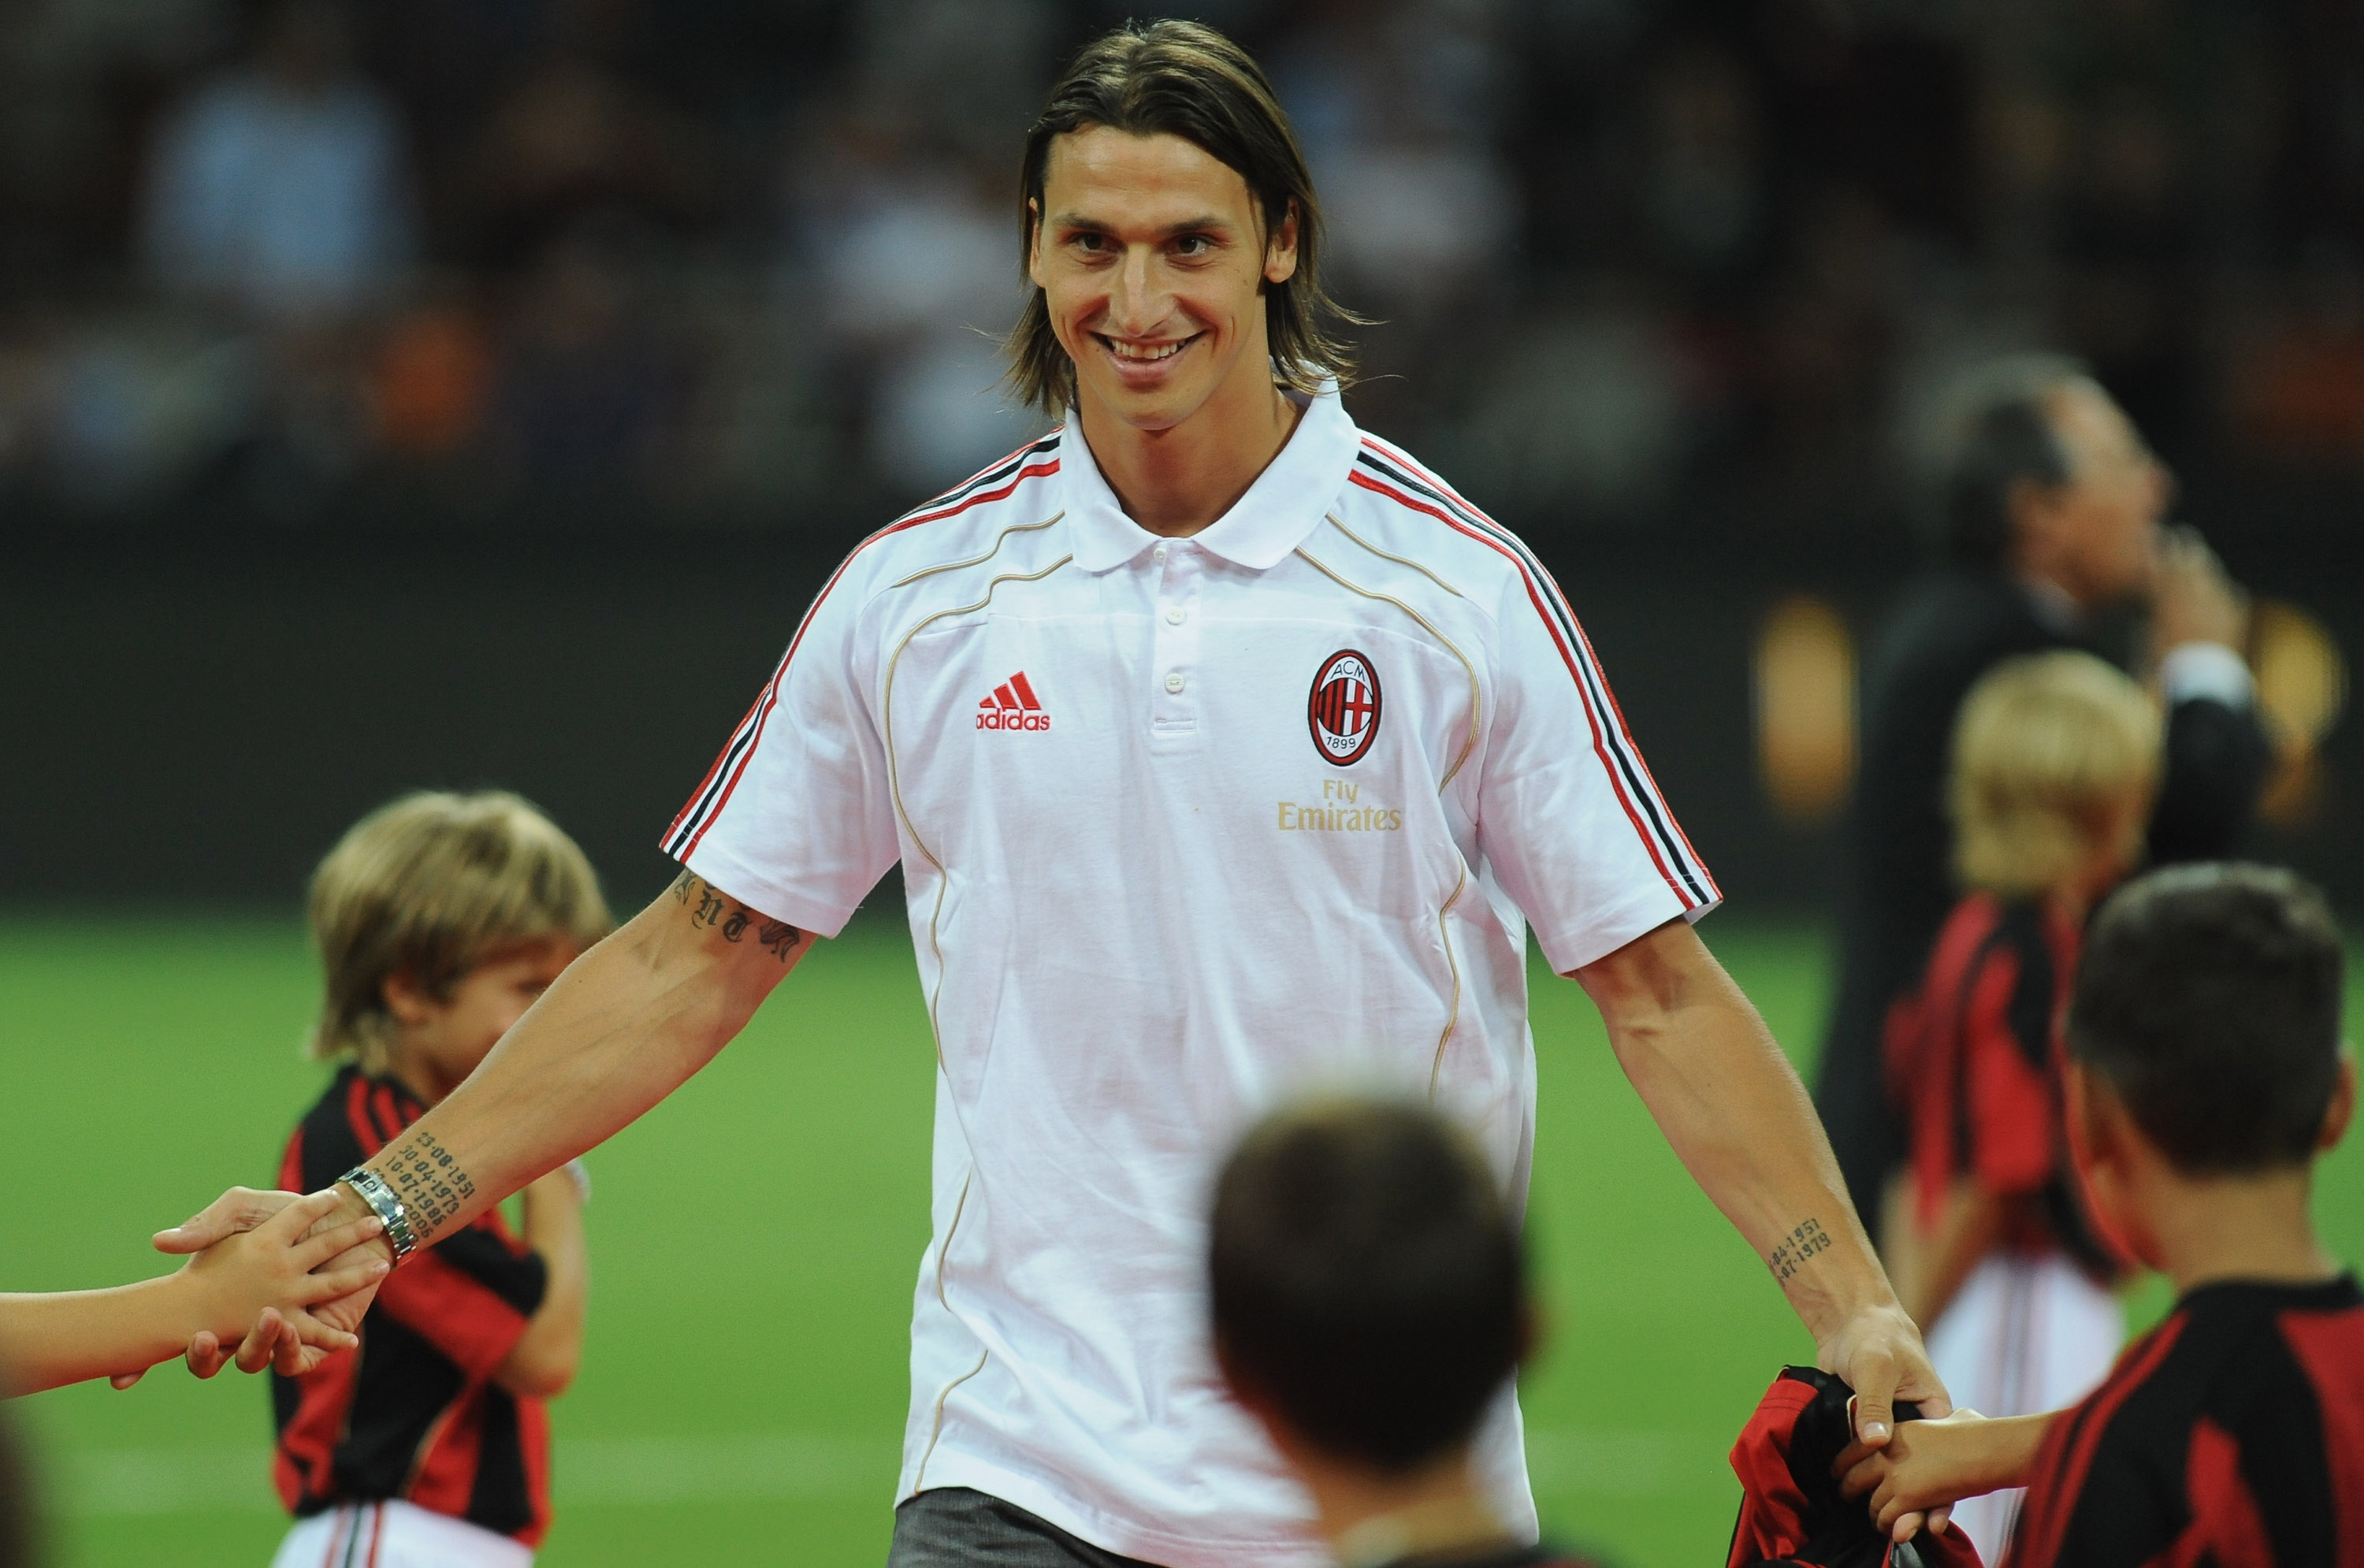 MILAN, ITALY - AUGUST 29:  AC Milan presents Zlatan Ibrahimovic as its new player for the current Serie A season during the Serie A match between AC Milan and Lecce at Stadio Giuseppe Meazza on August 29, 2010 in Milan, Italy.  (Photo by Valerio Pennicino